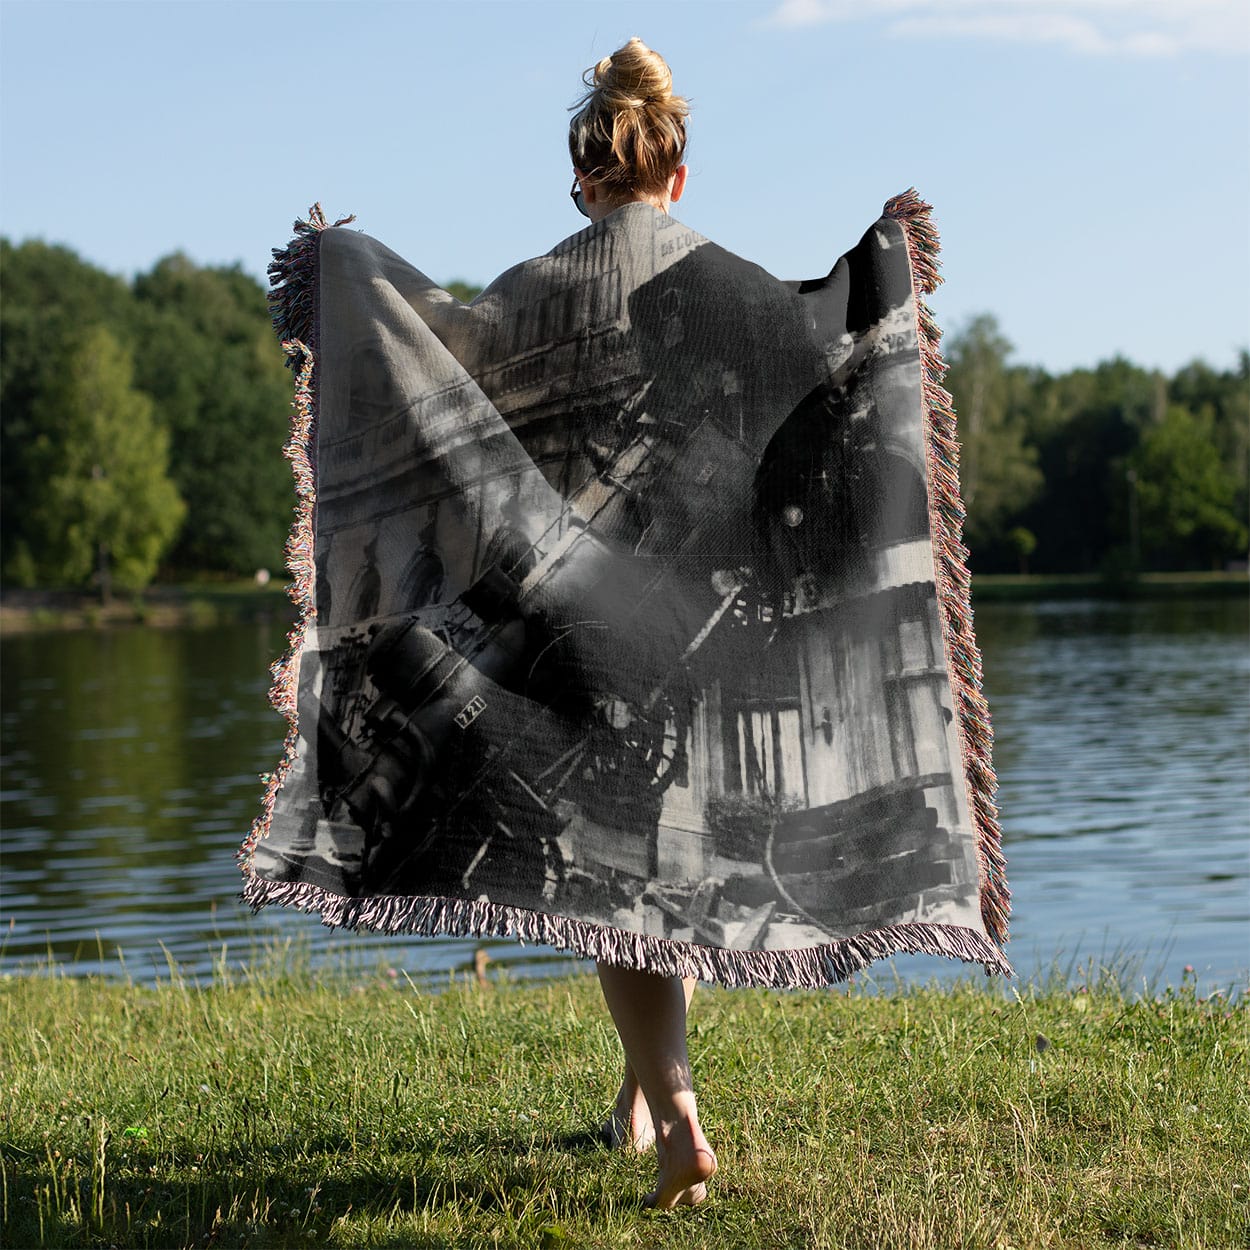 Disaster Woven Blanket Held on a Woman's Back Outside